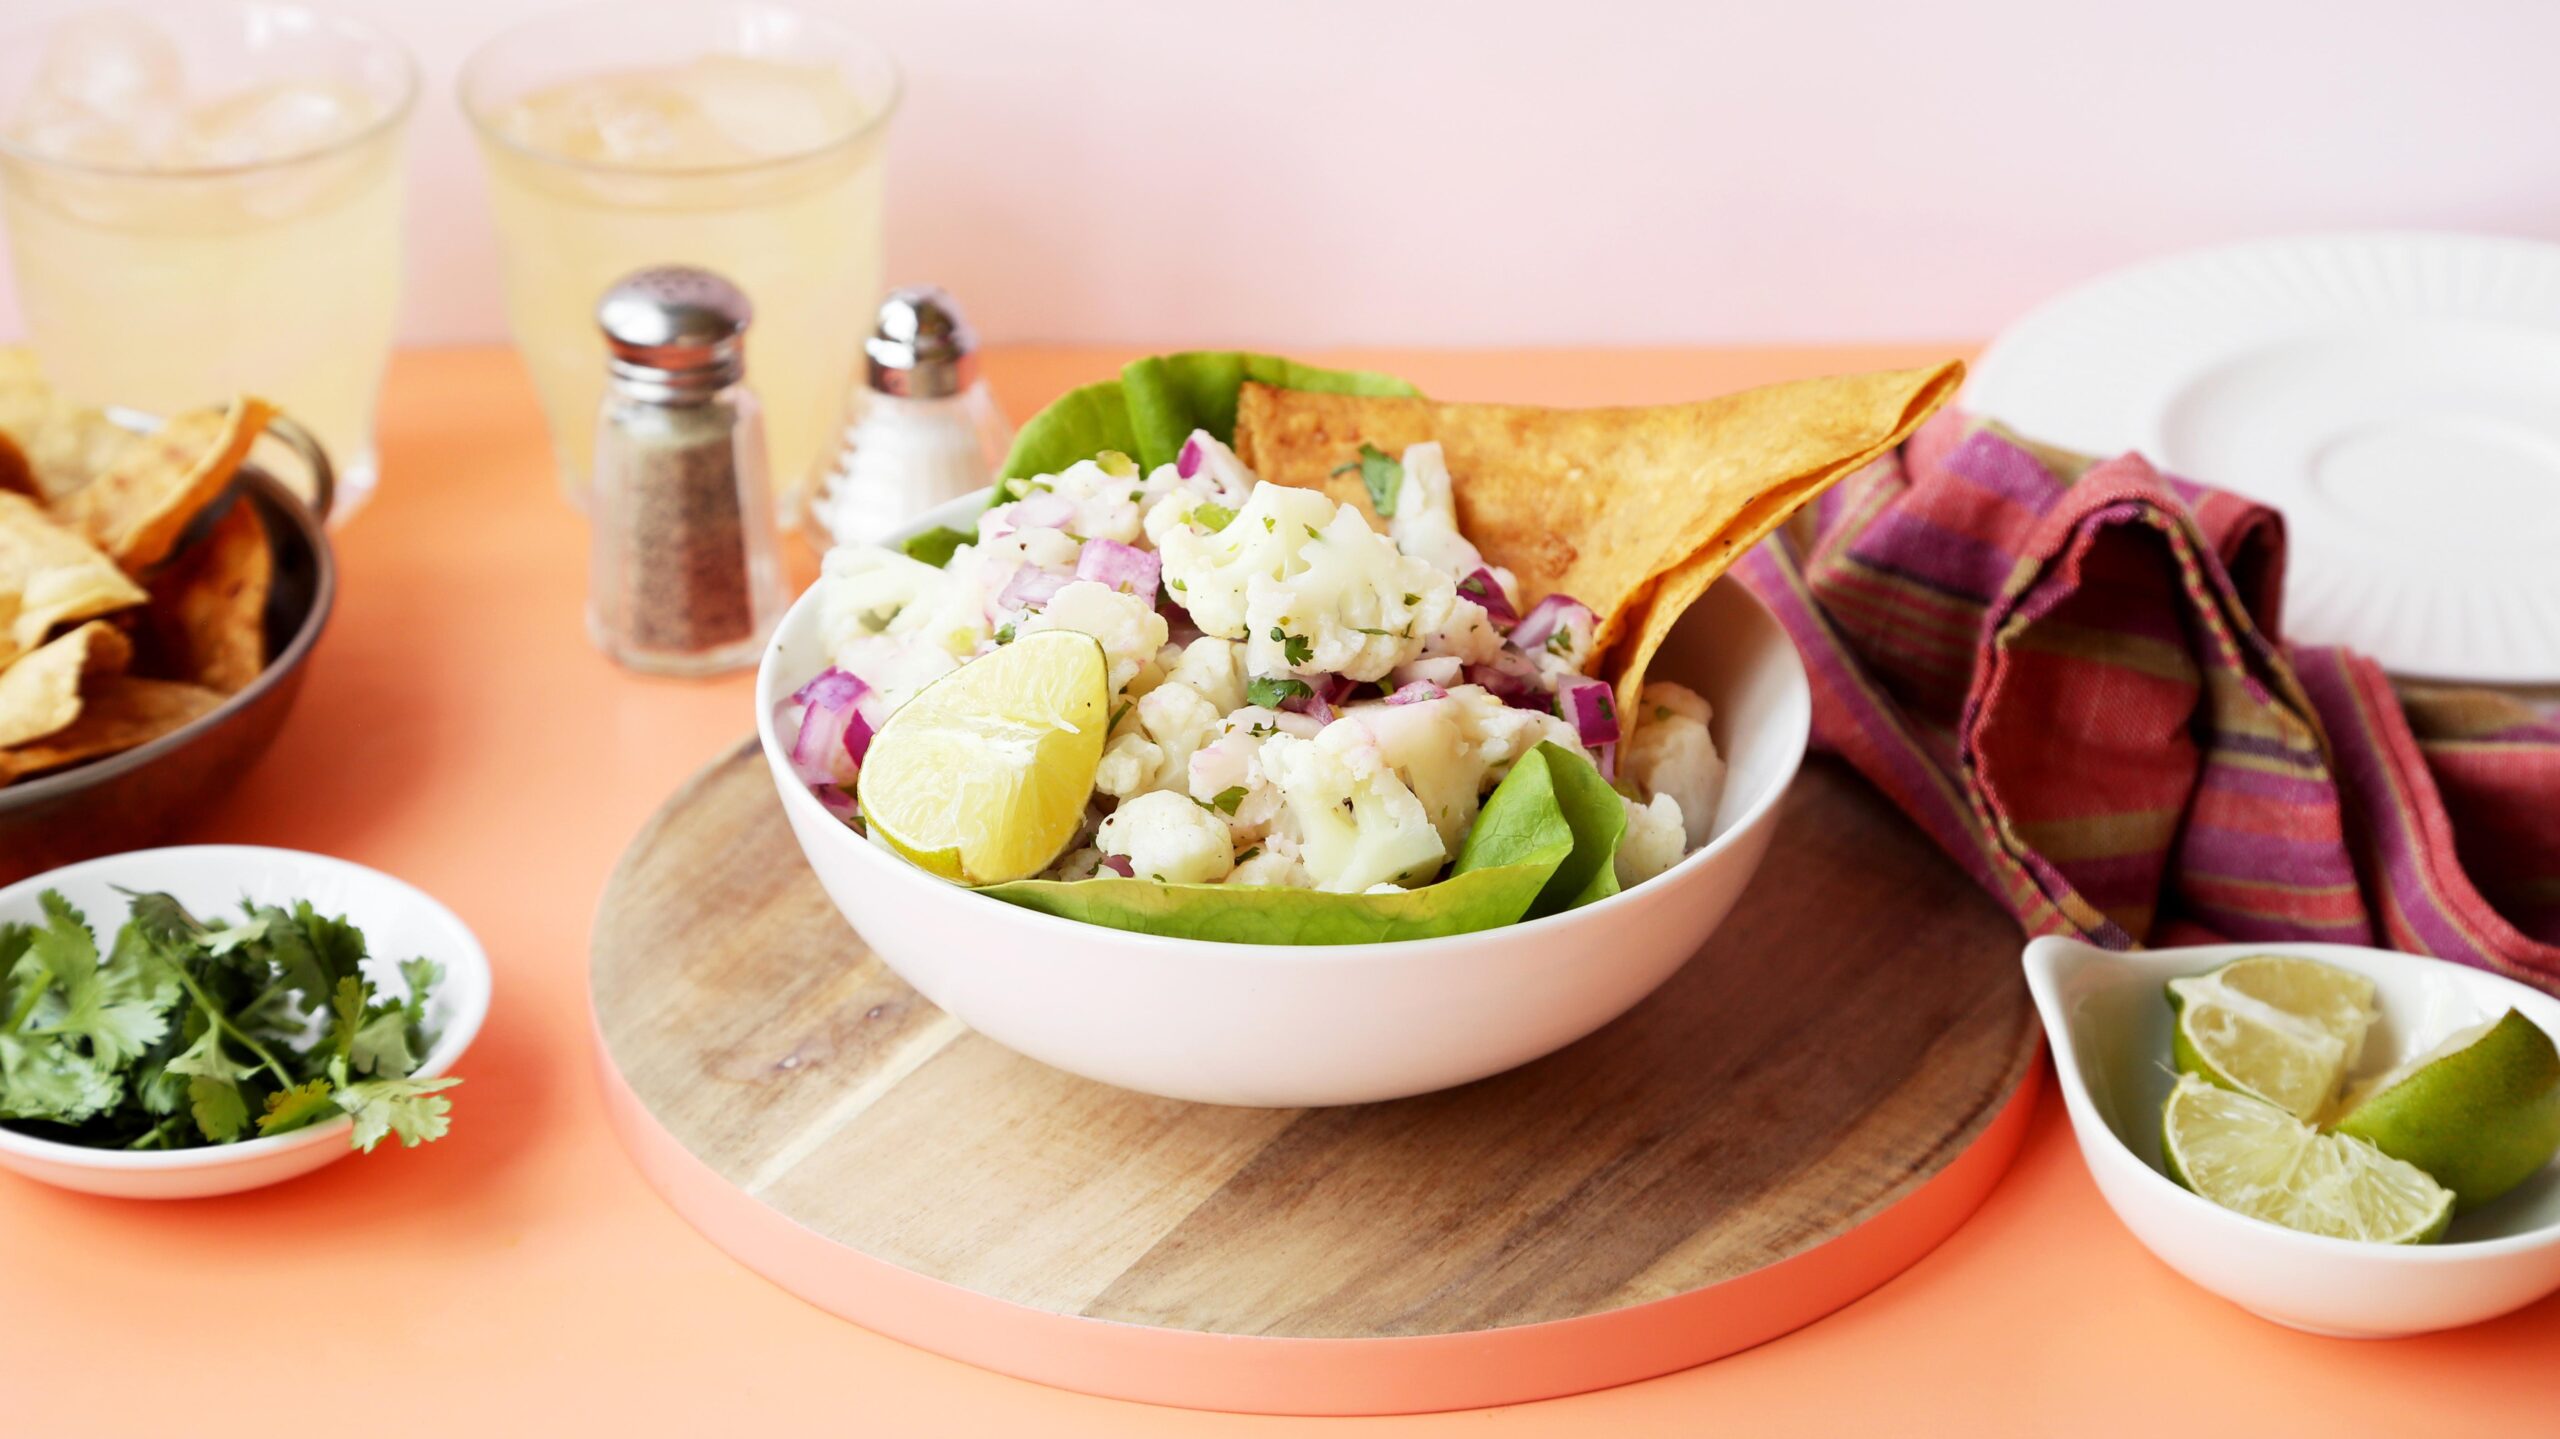  Who says ceviche has to be made with seafood? Try this plant-based twist on a classic.